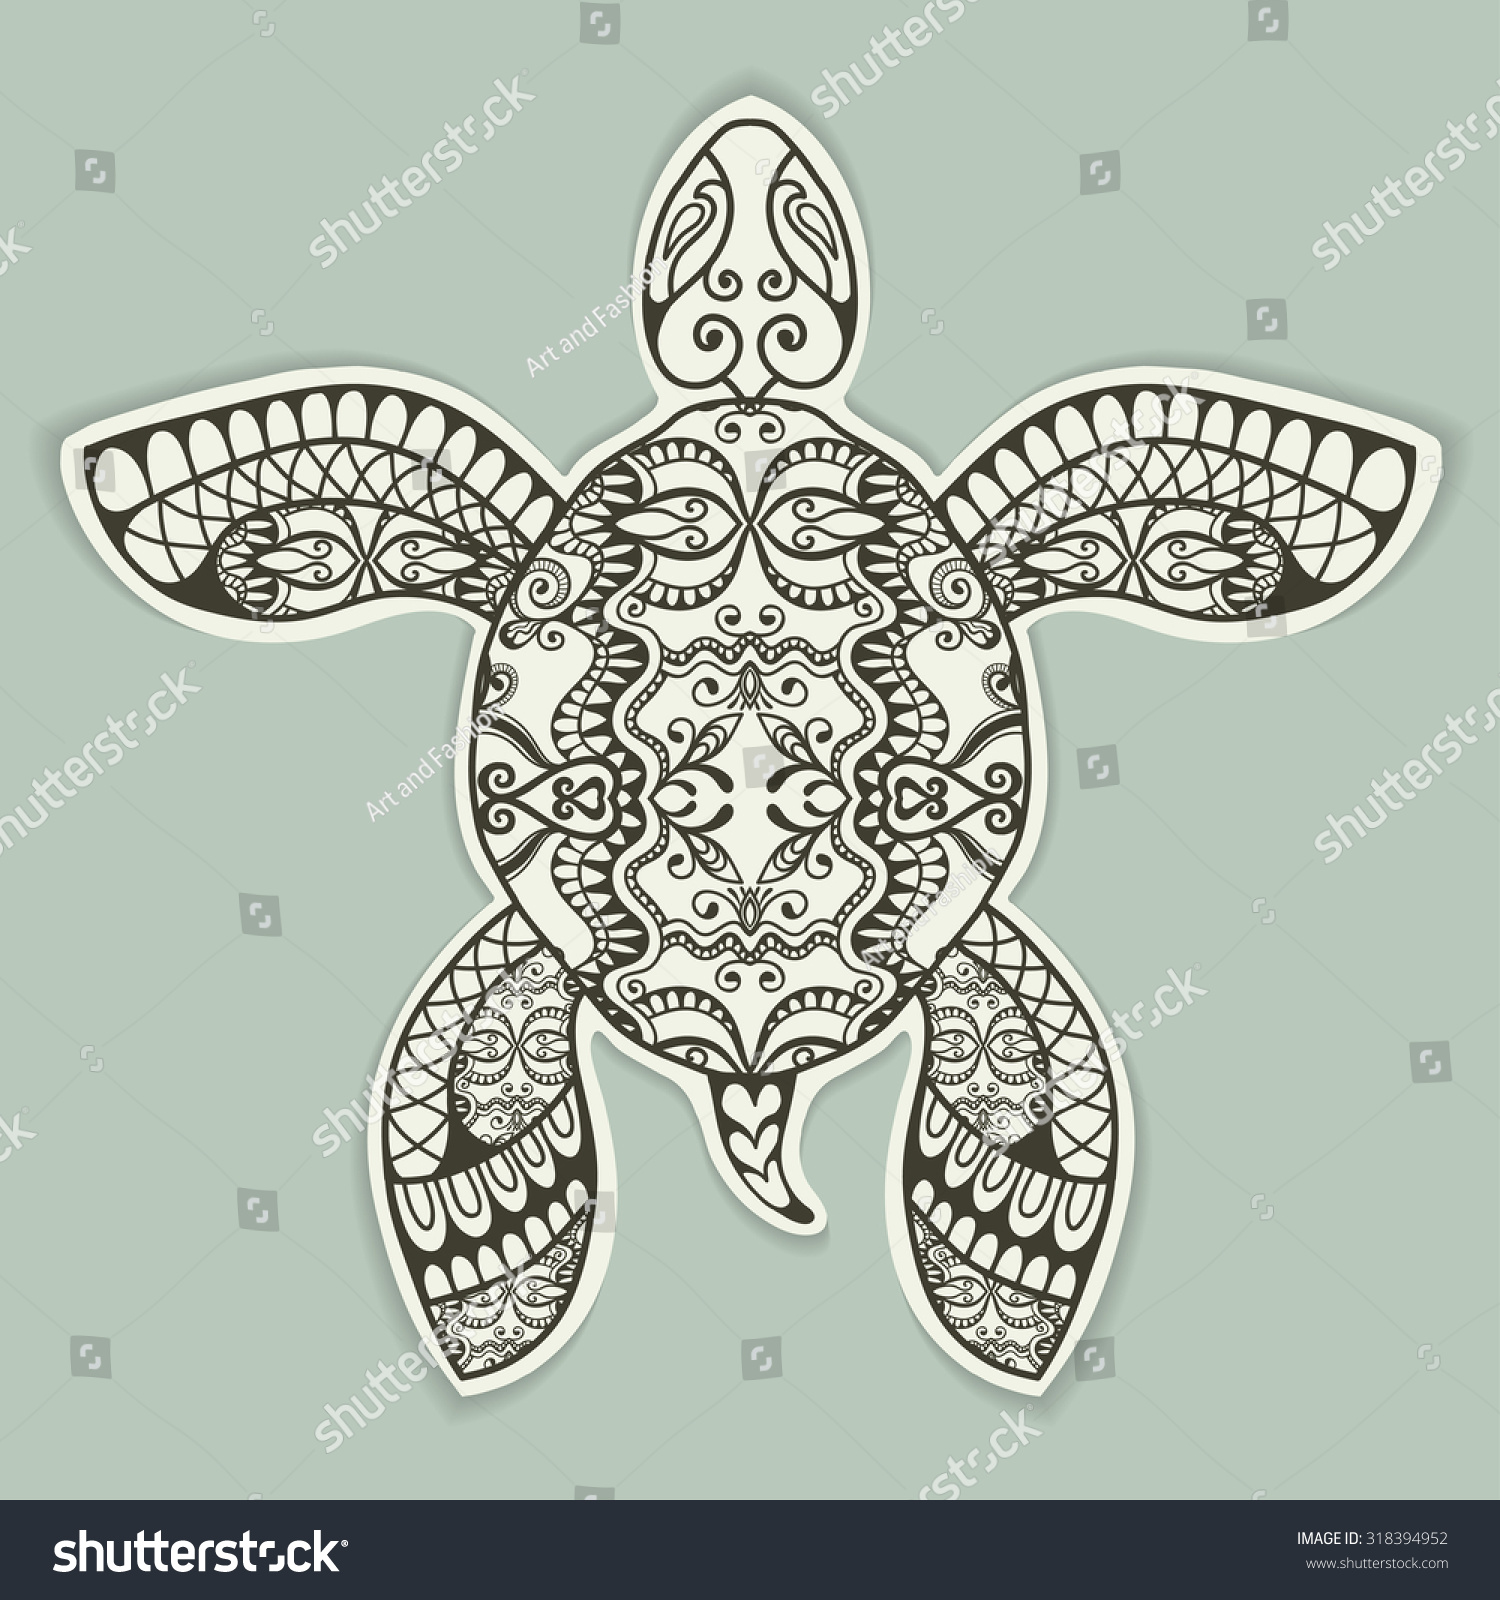 Decorative Turtle Ethnic Ornament Cut Out Stock Vector Royalty Free